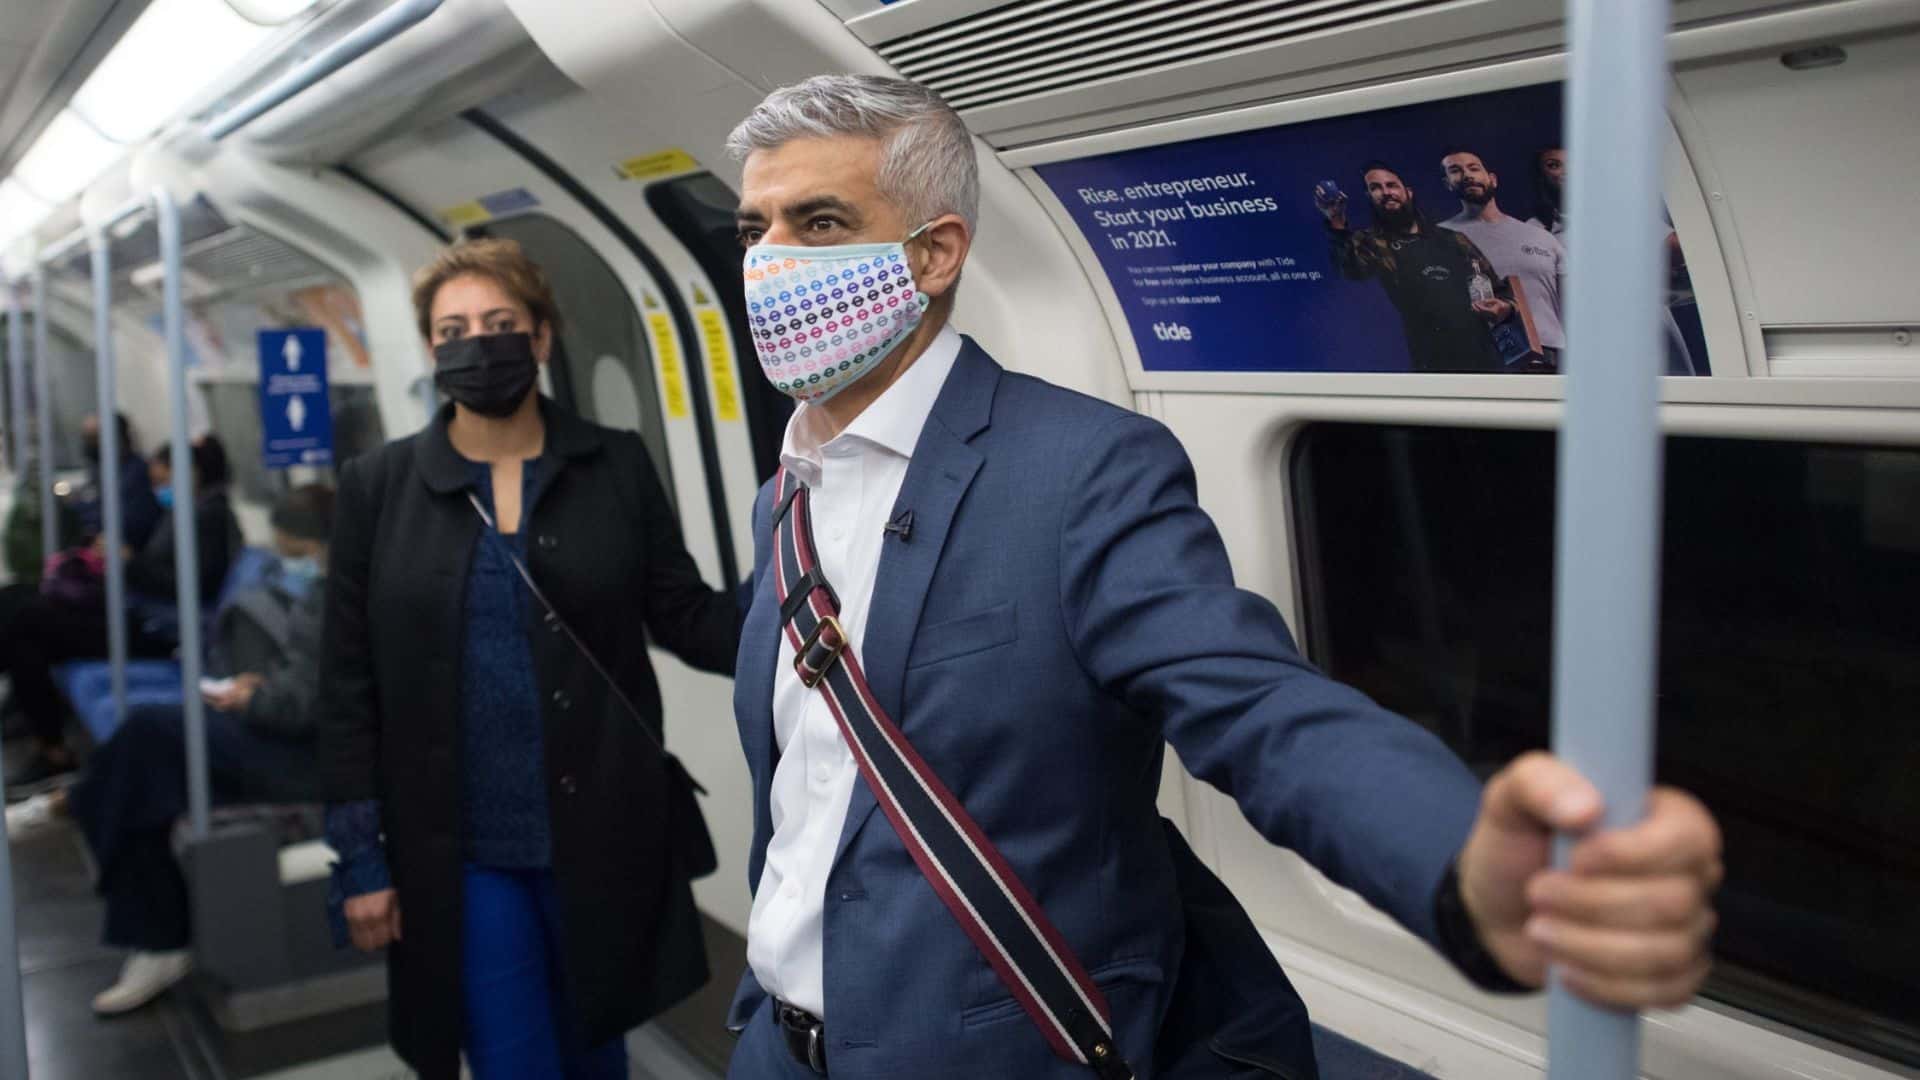 Sadiq Khan attributes issues with the London Underground, including significant delays on the Central line, to the government